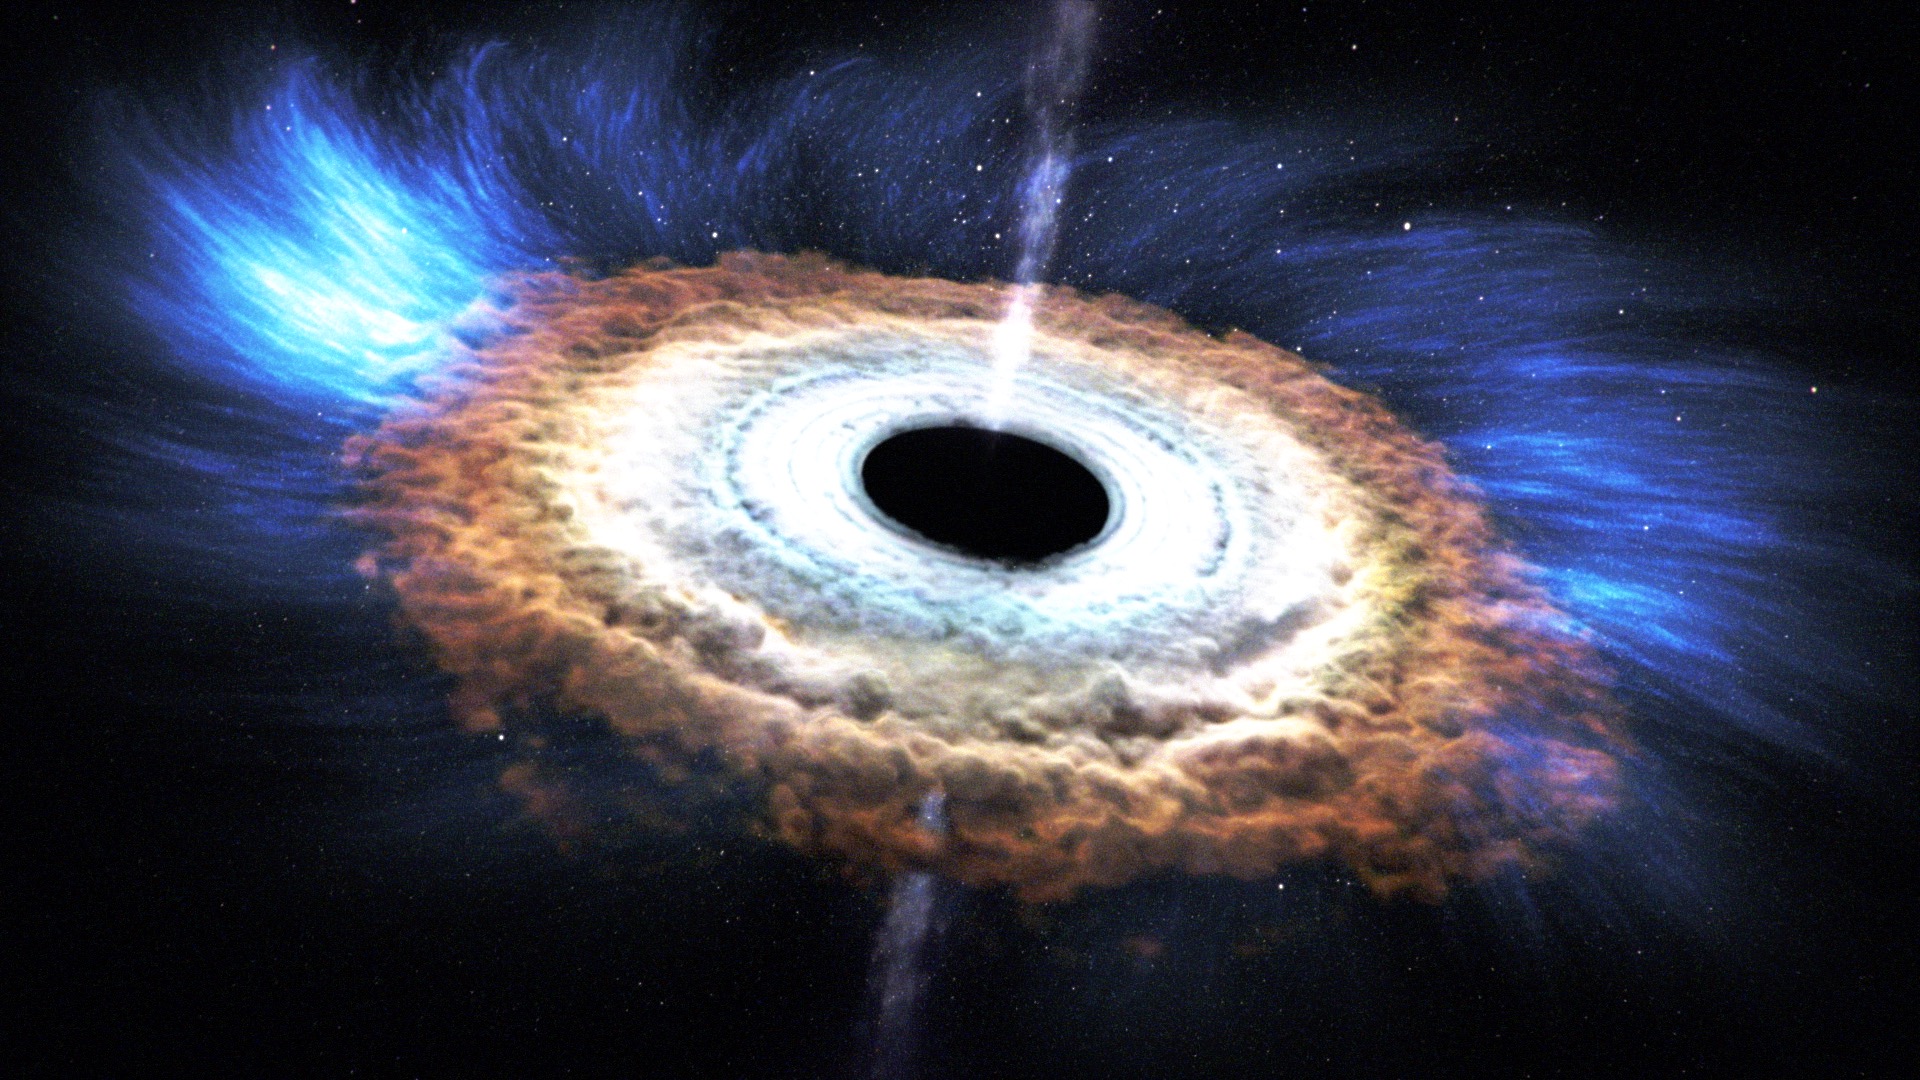 A star approaching too close to a massive black hole is torn apart by tidal forces, as shown in this artist's rendering. Filaments containing much of the star's mass fall toward the black hole. Eventually these gaseous filaments merge into a smooth, hot disk glowing brightly in X-rays. As the disk forms, its central region heats up tremendously, which drives a flow of material, called a wind, away from the disk.   Credit: NASA's Goddard Space Flight Center/CI LabWatch this video on the NASA Goddard YouTube channel.For complete transcript, click here.